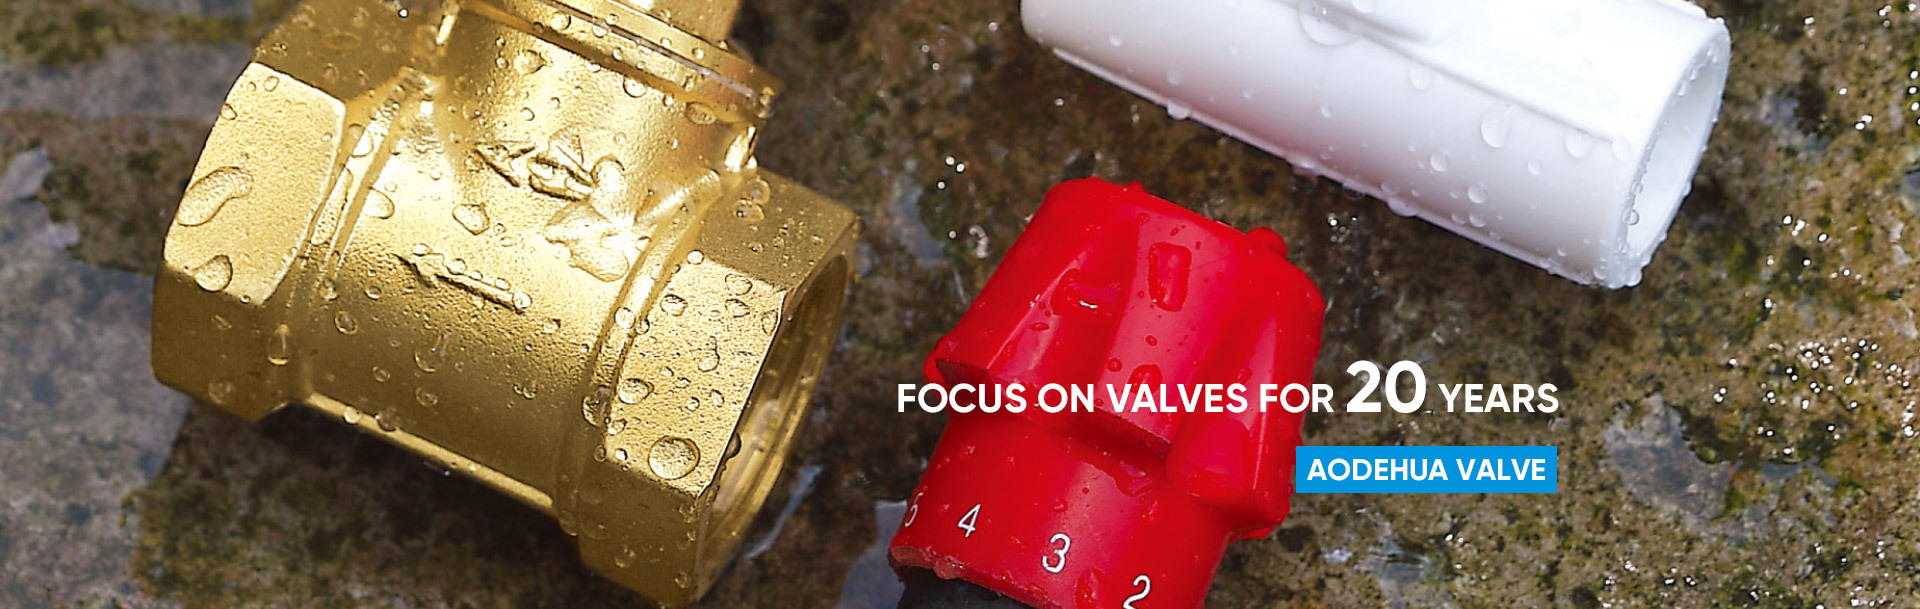 Focus on valves for 20 years